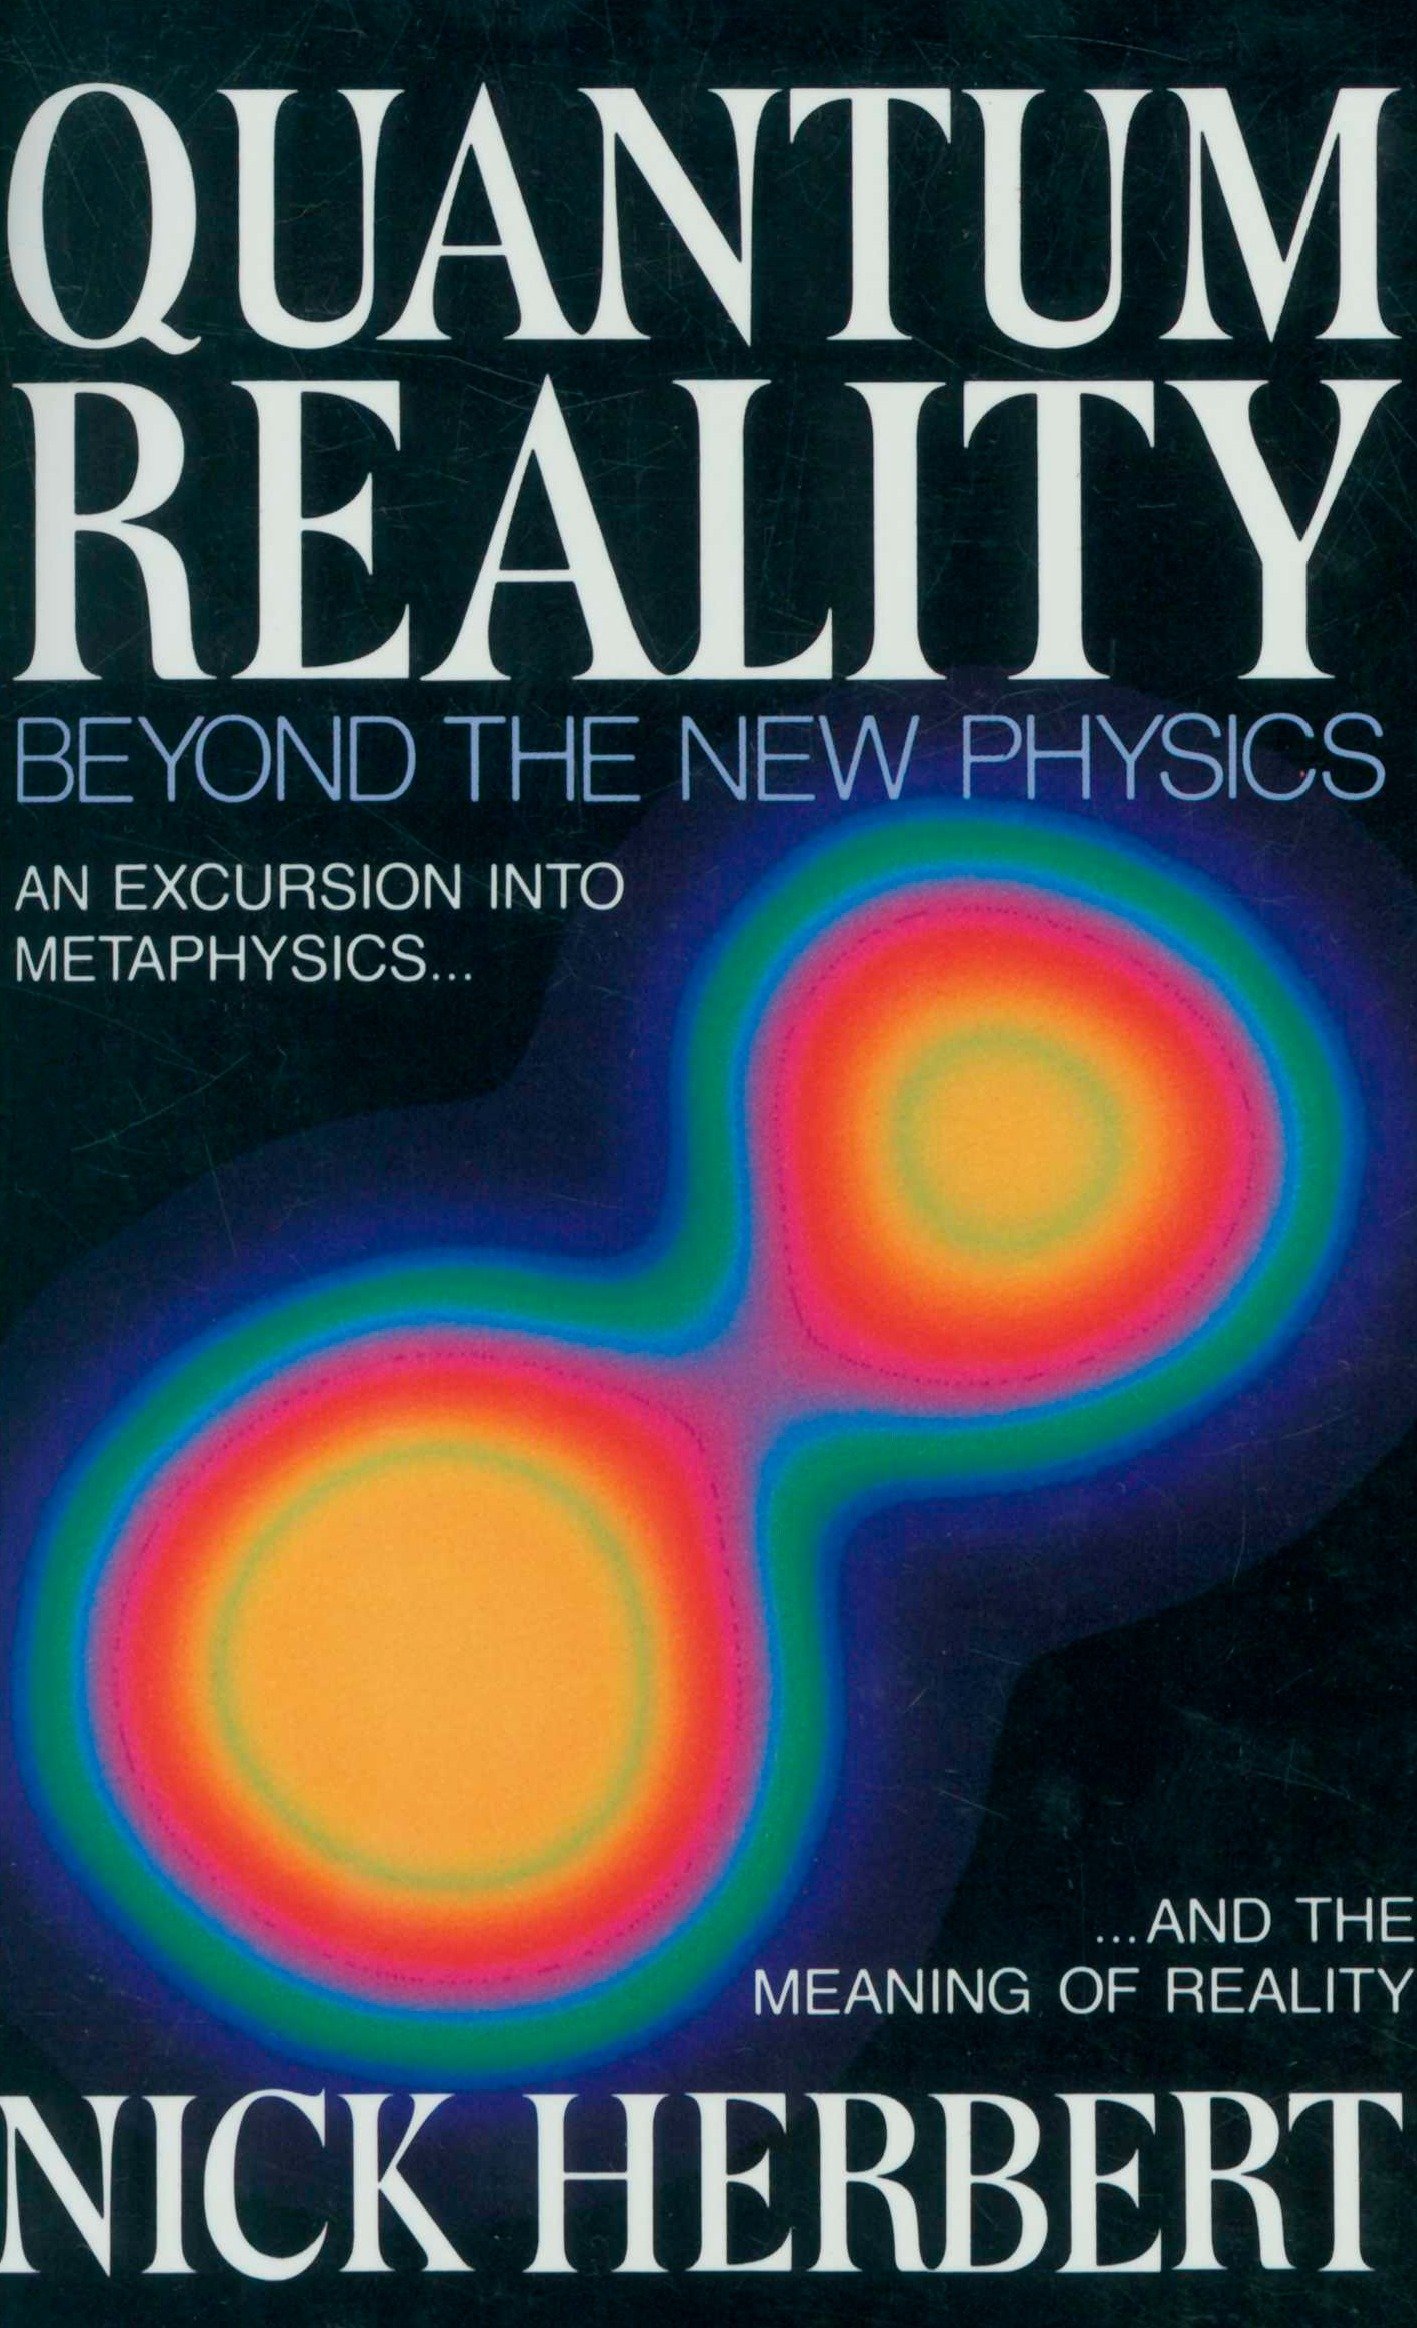 Quantum Reality, Beyond the New Physics